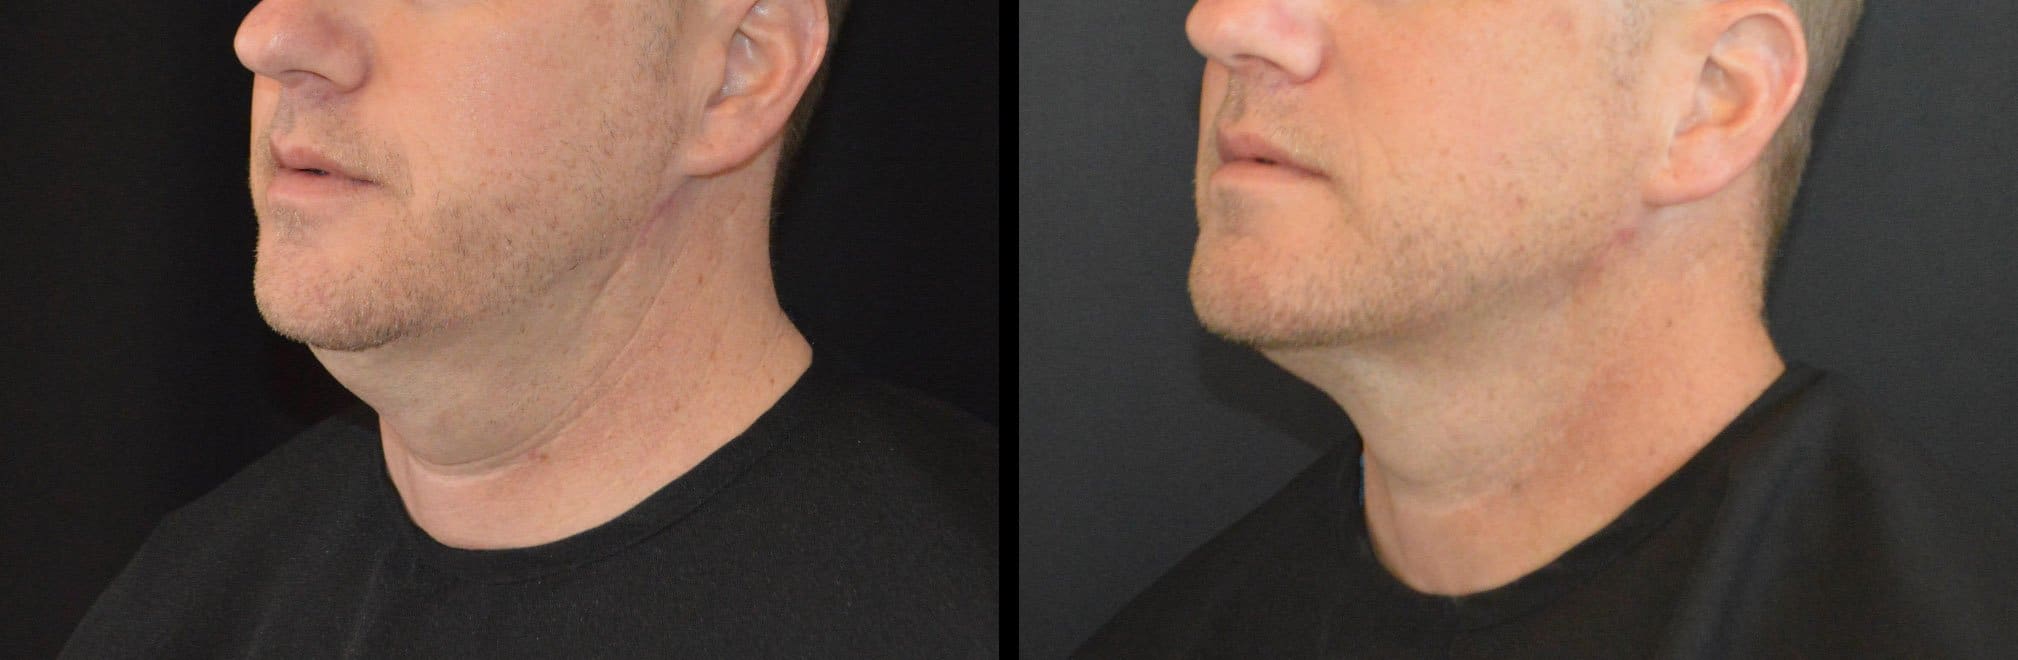 Cincinnati Kybella Treatment Before and After Photo